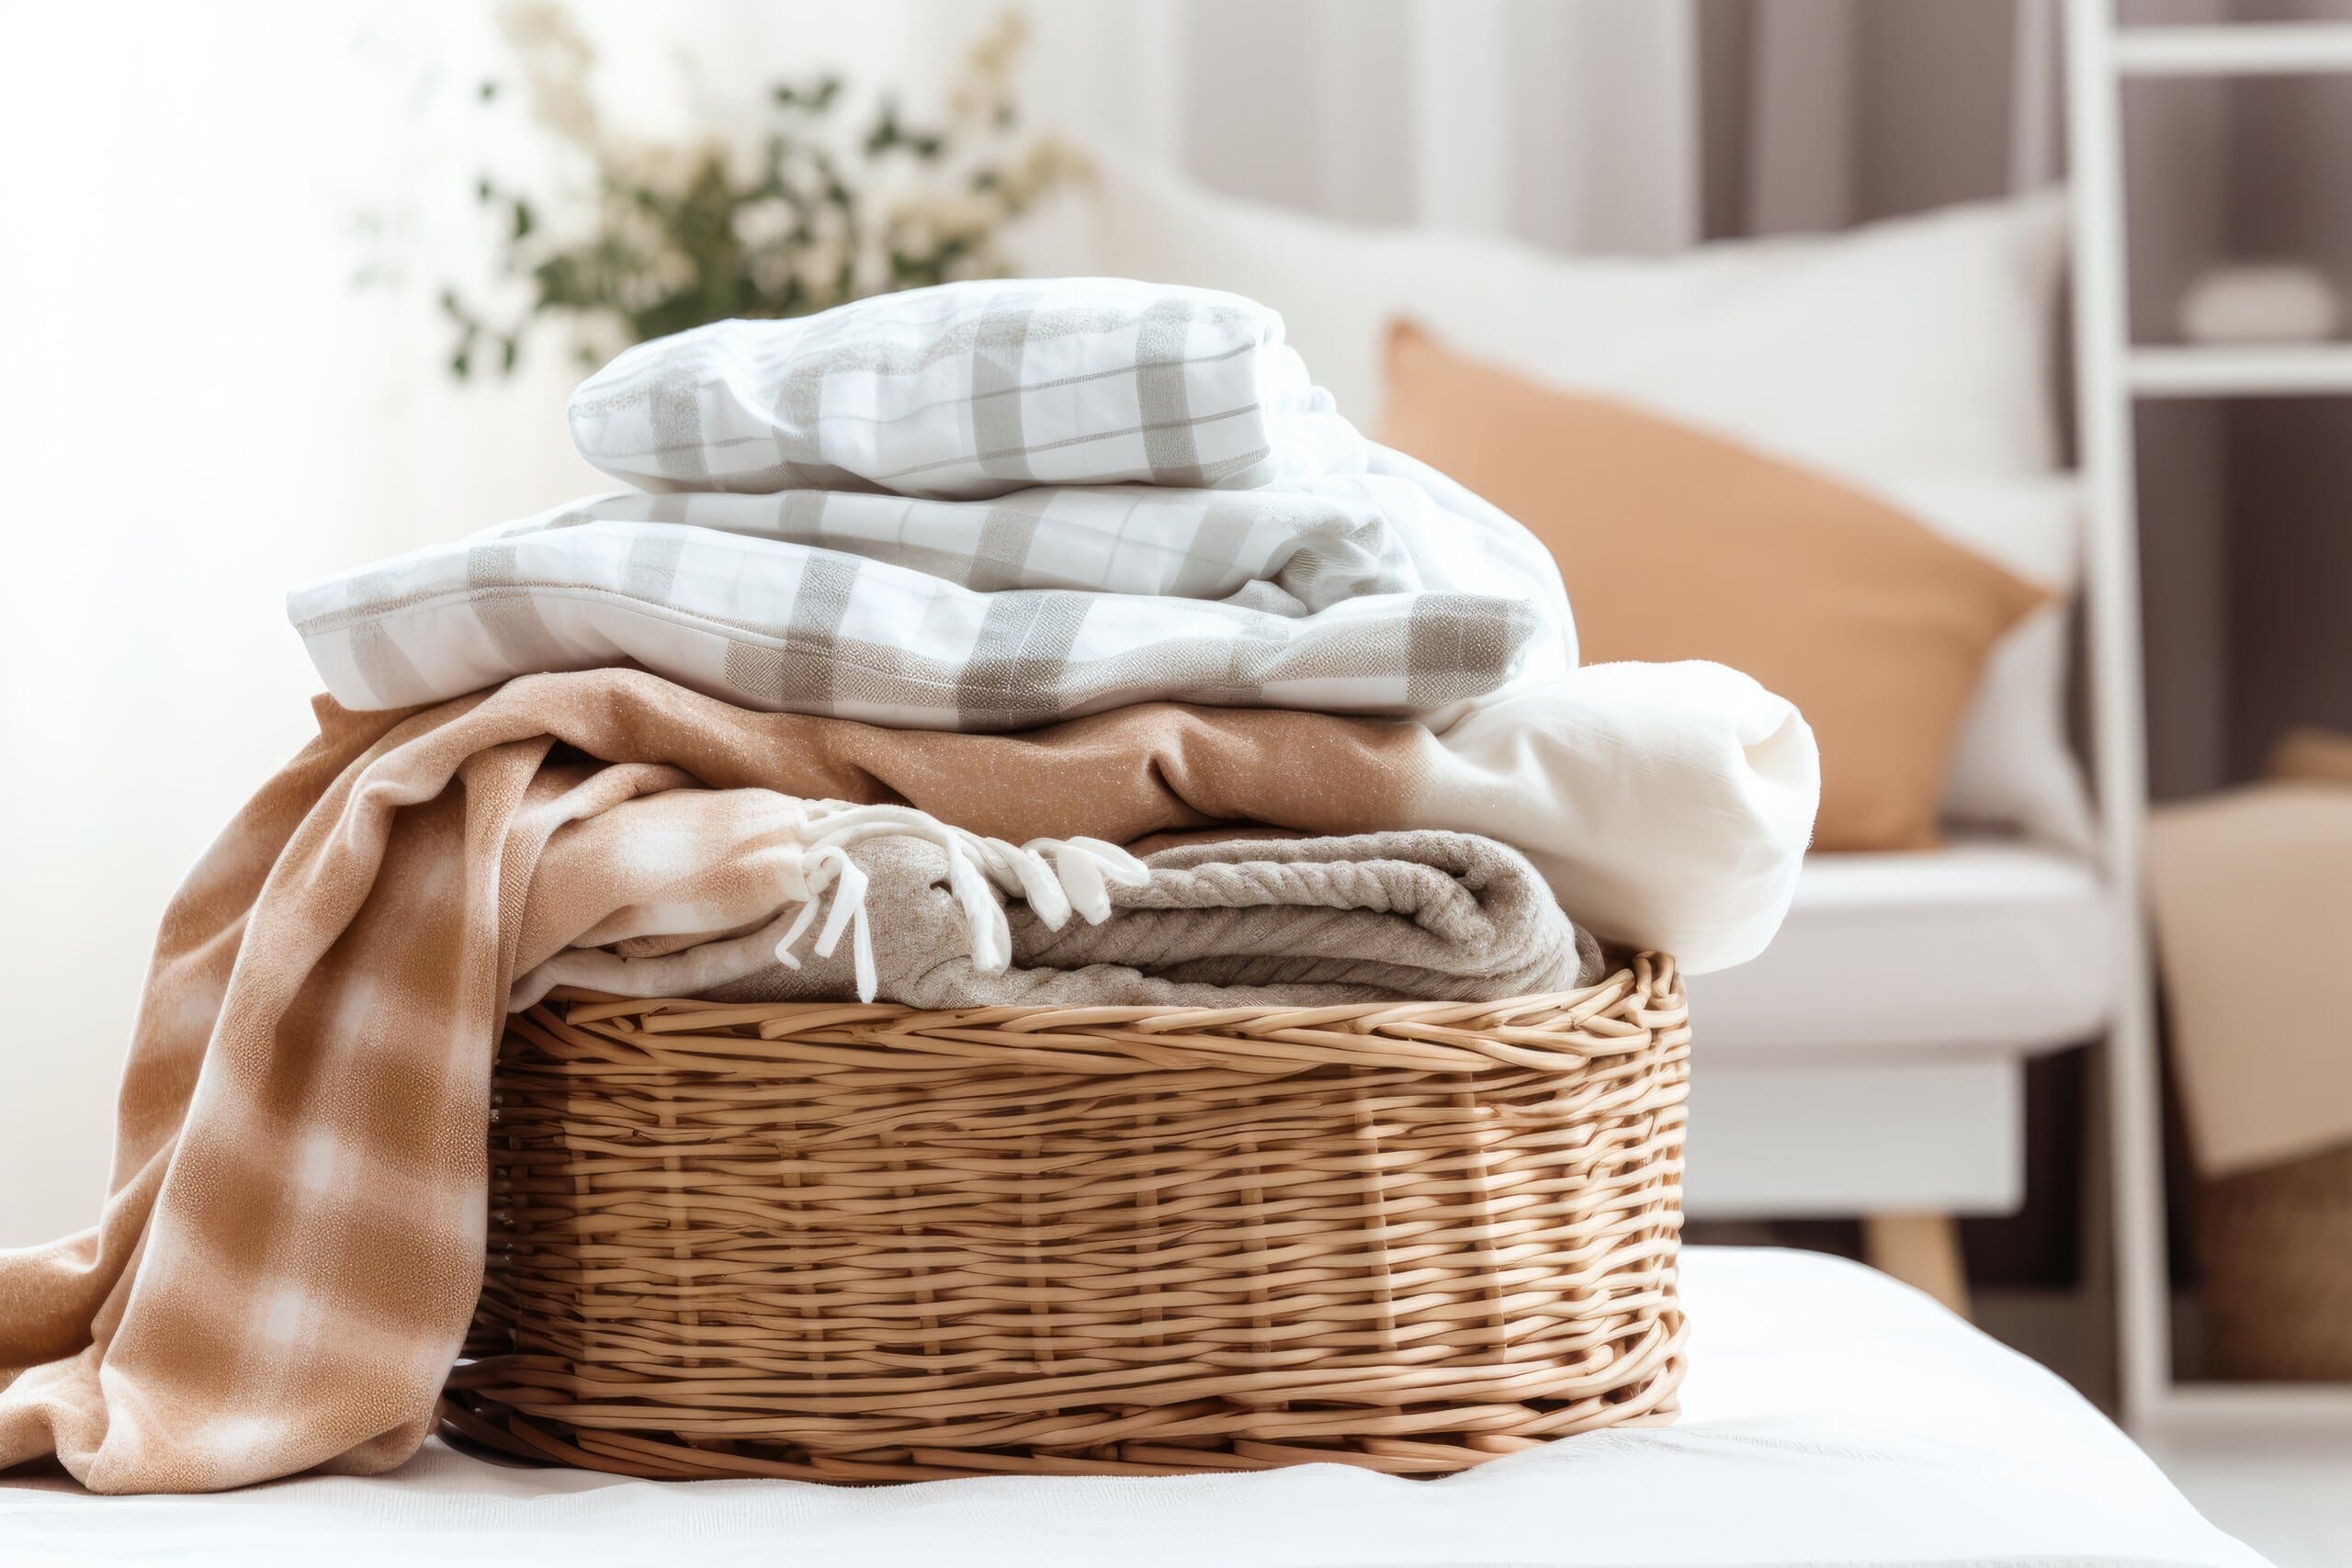 Laundry basket of clean, folded bedding.